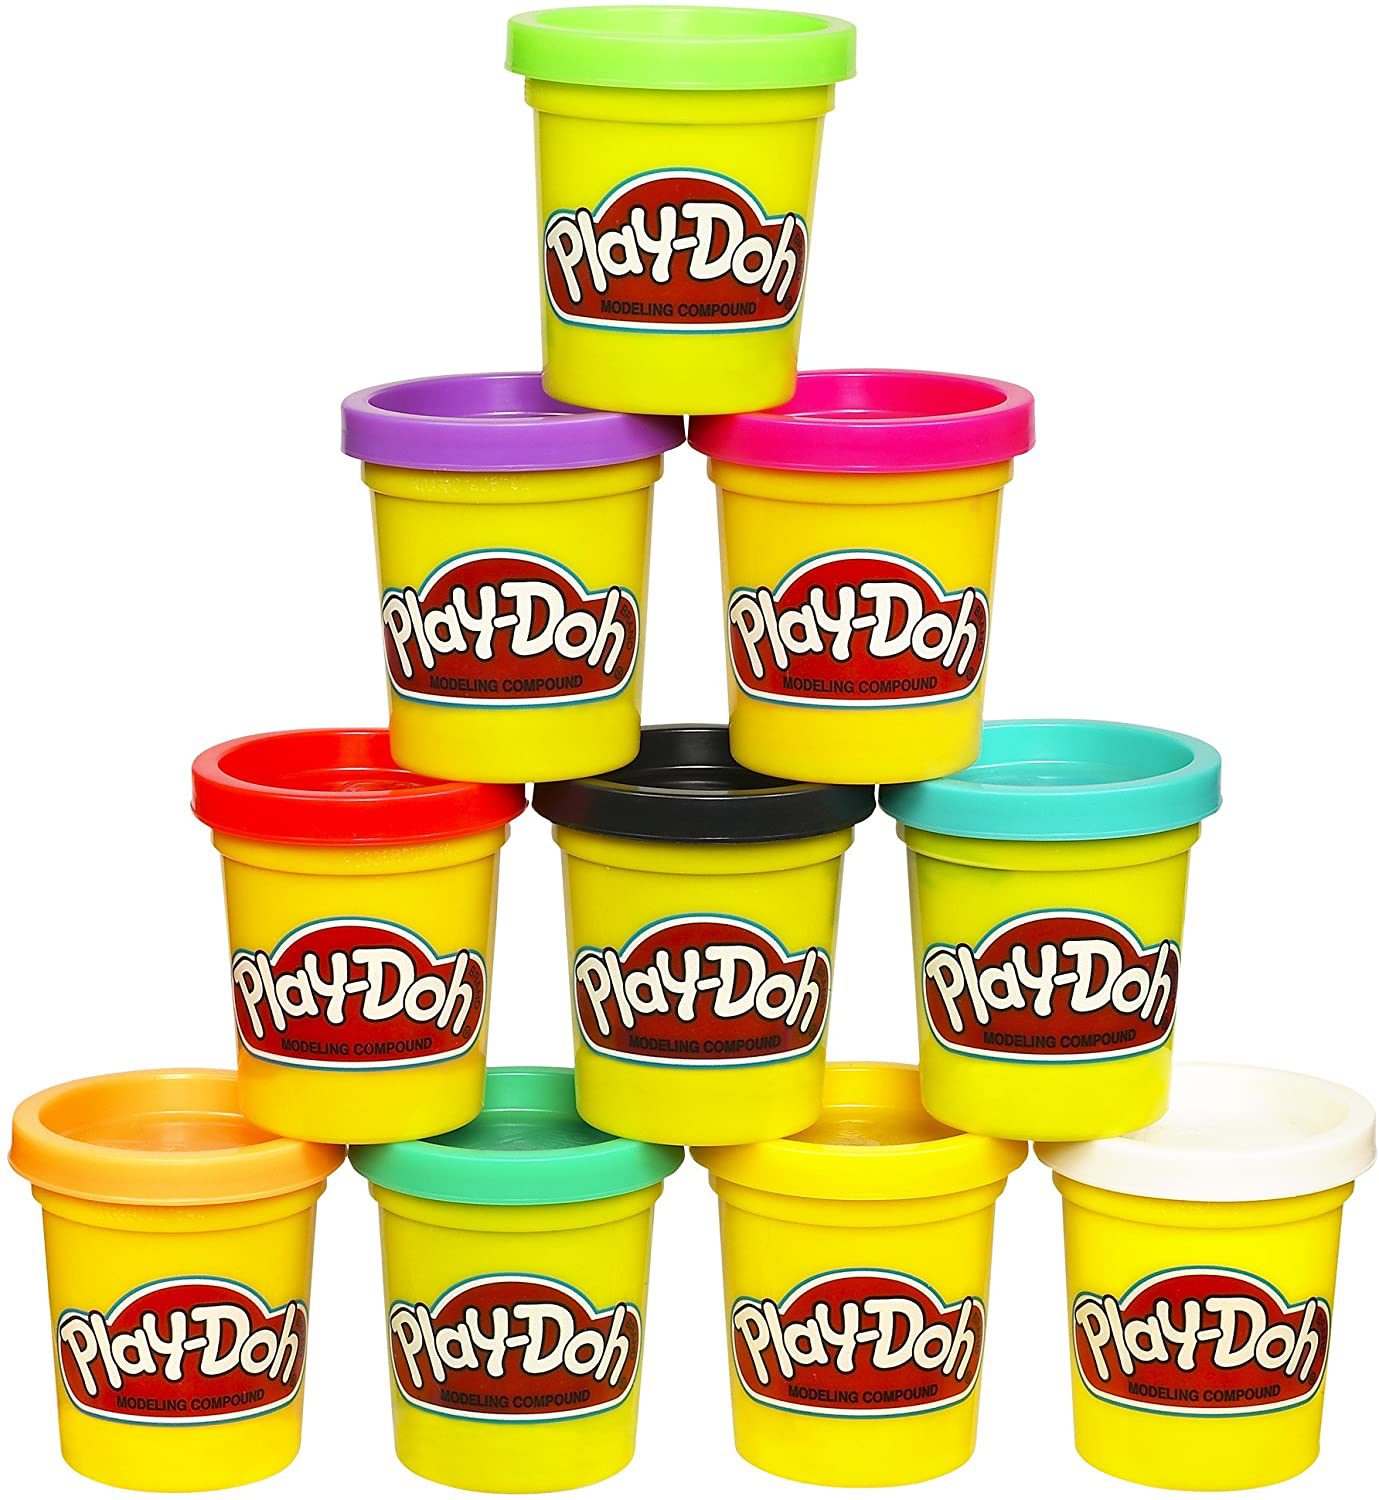 Play-Doh Modeling Compound 10-Pack Case of Colors, Non-Toxic, Assorted, 2 oz. Cans, Multicolor